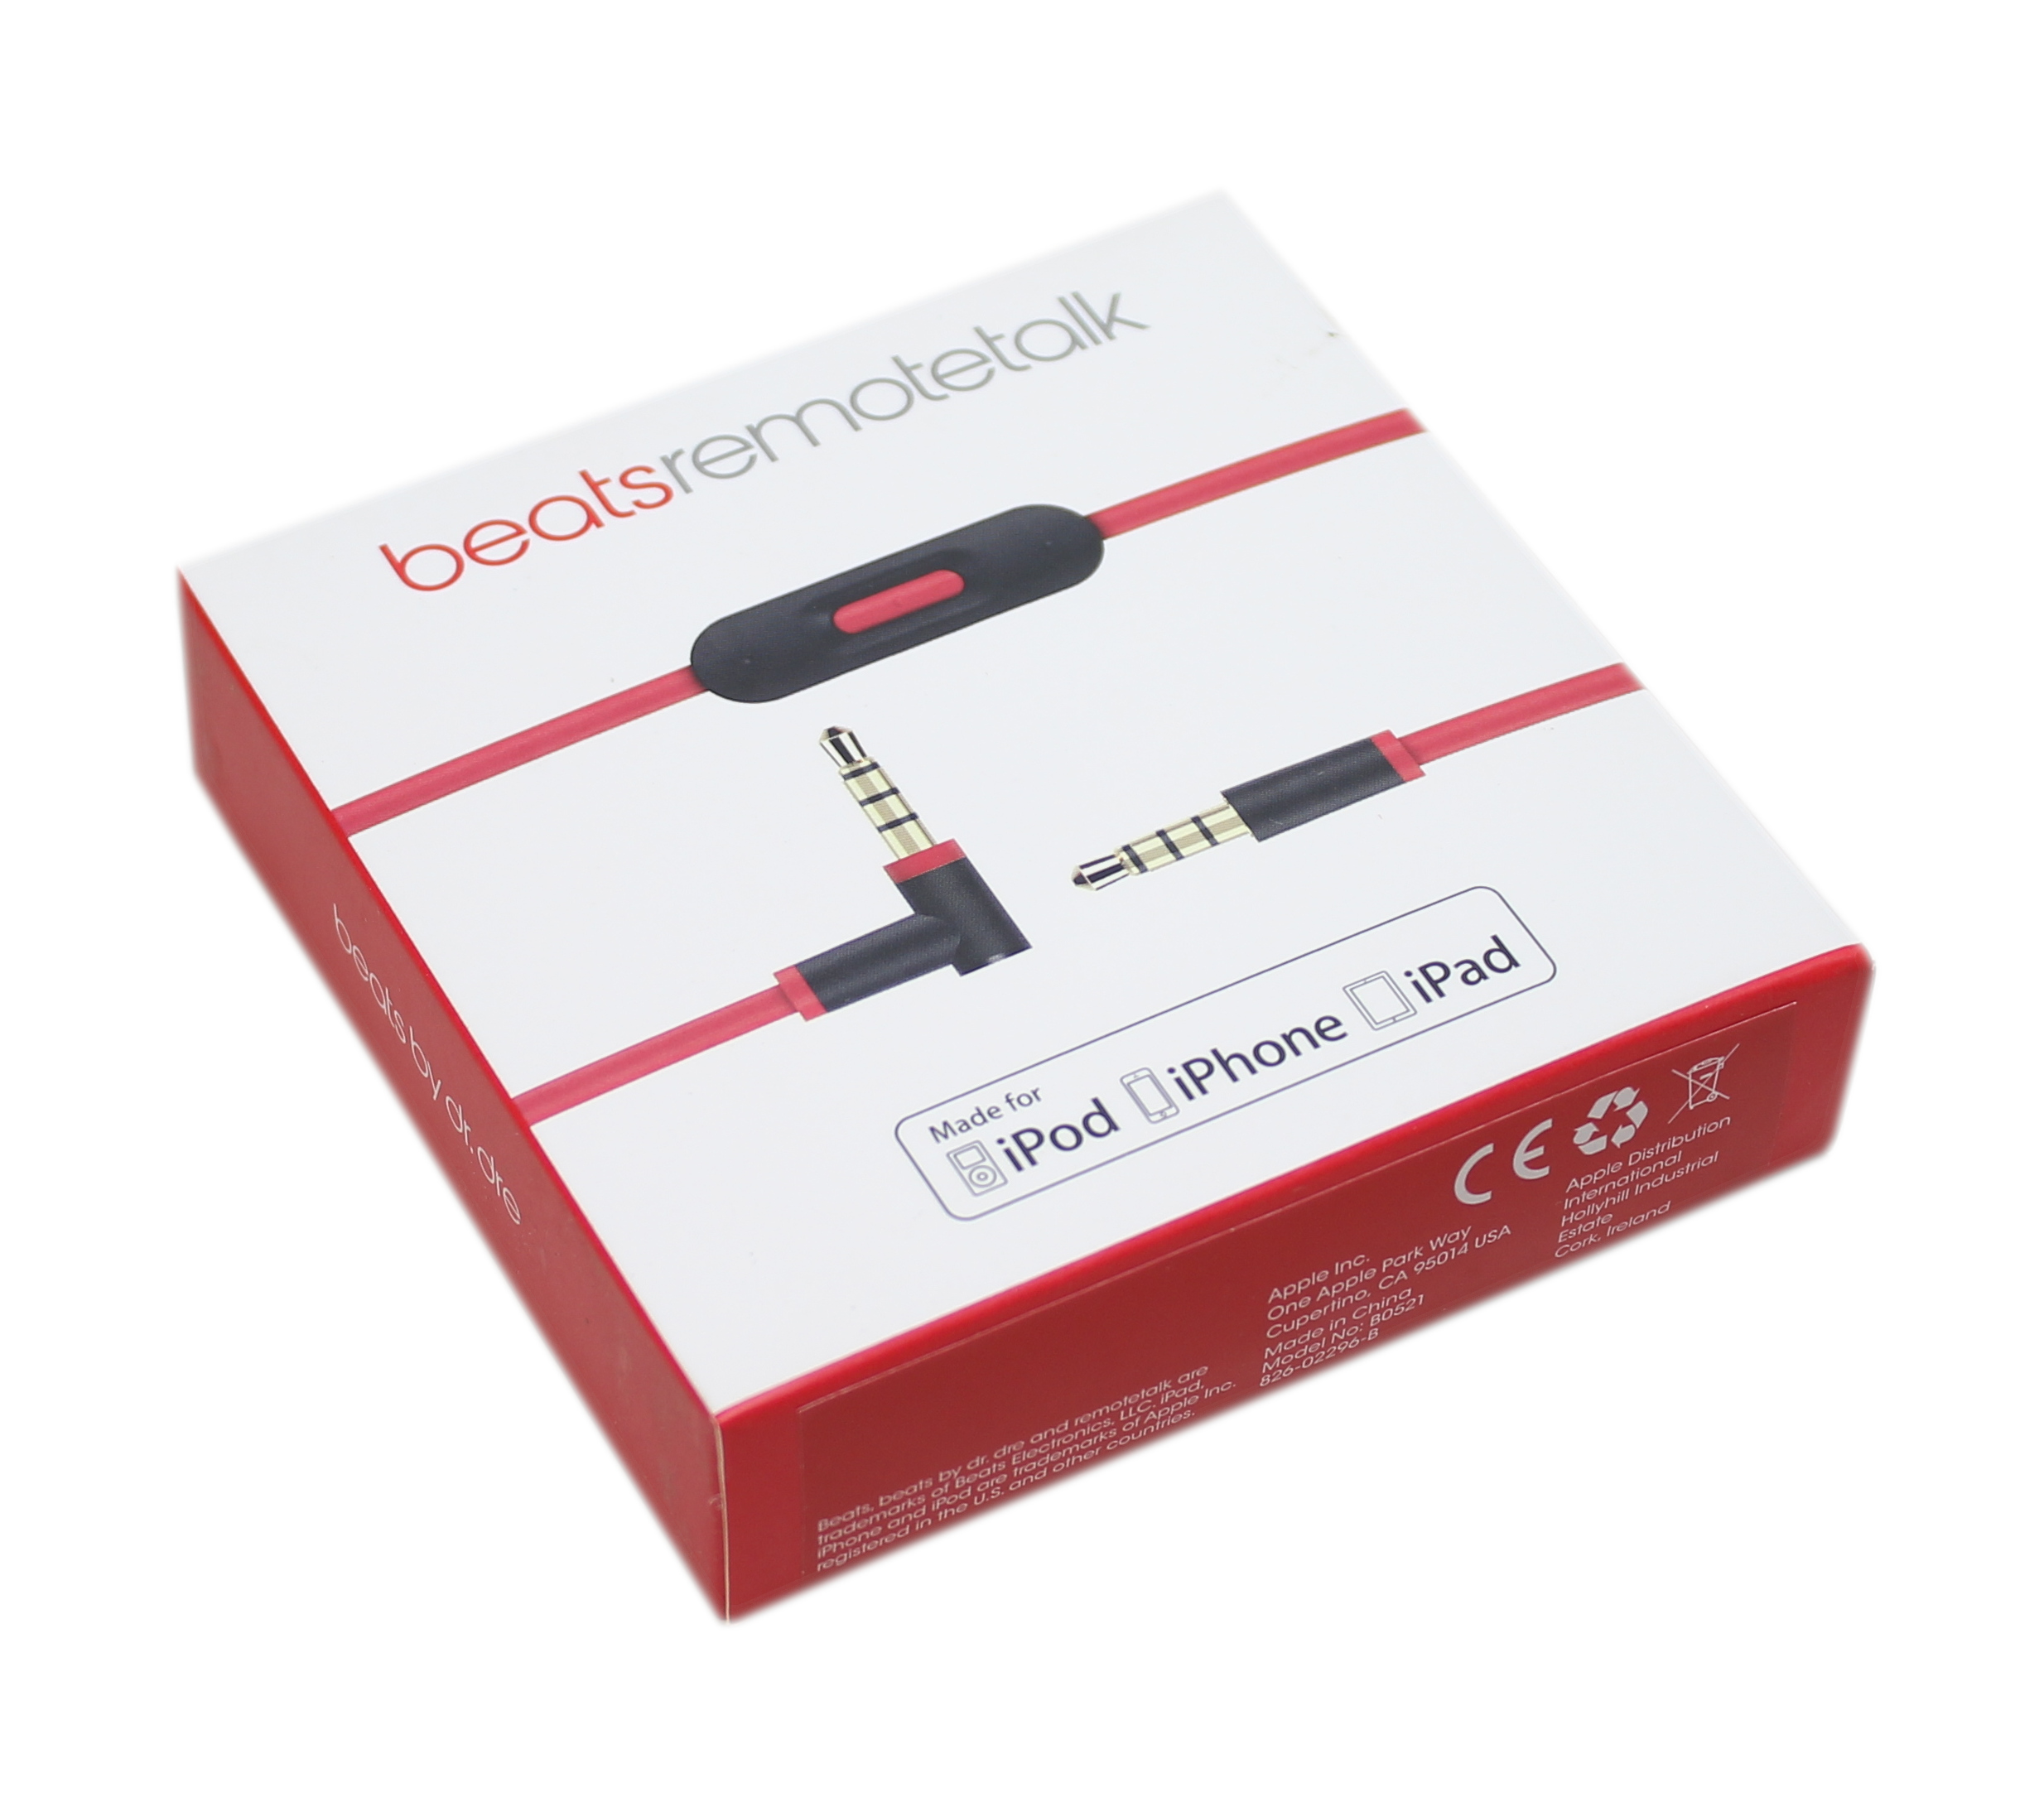 Beats RemoteTalk Cable Apple Audio 3.5mm by Dre Red B0521 MHDV2G/A [MHDV2G/A] - $16.99 : Professional Multi Monitor Graphics Card Experts